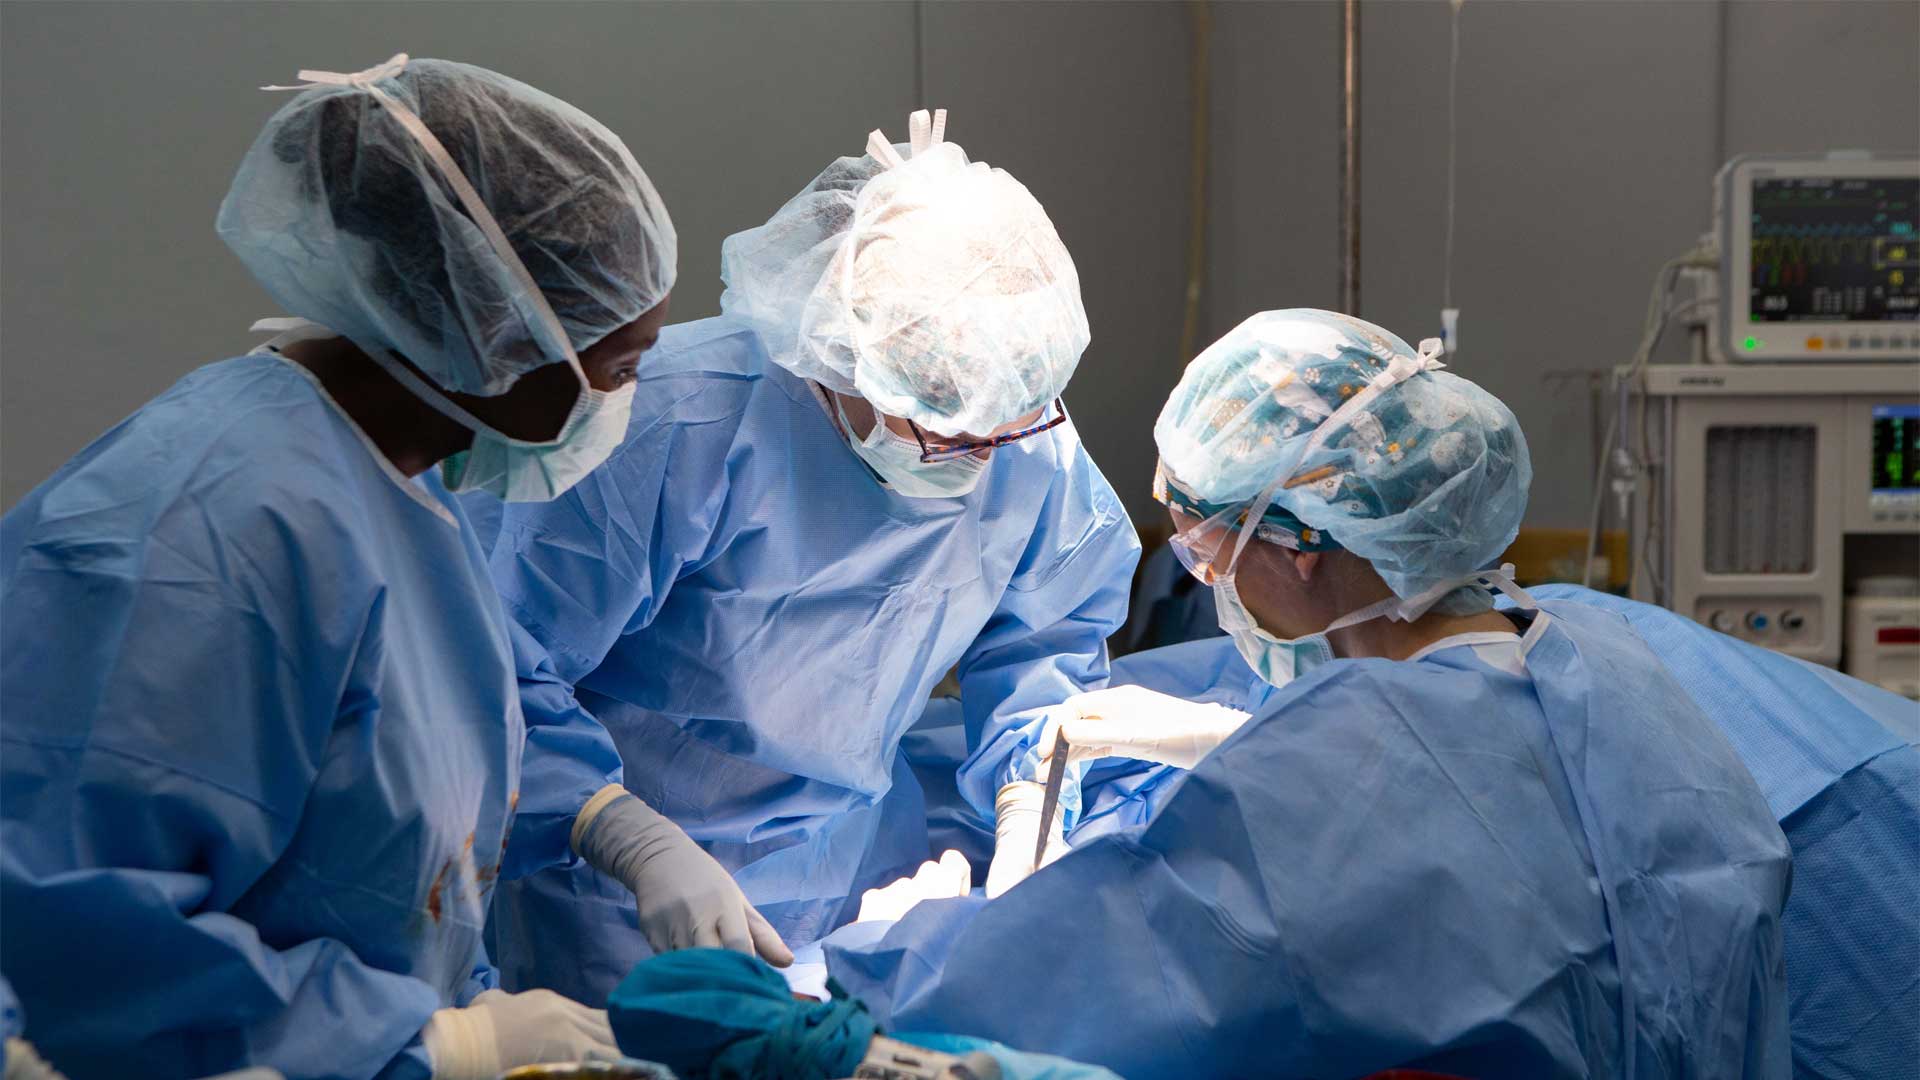 Finding surgery’s place on the global health agenda